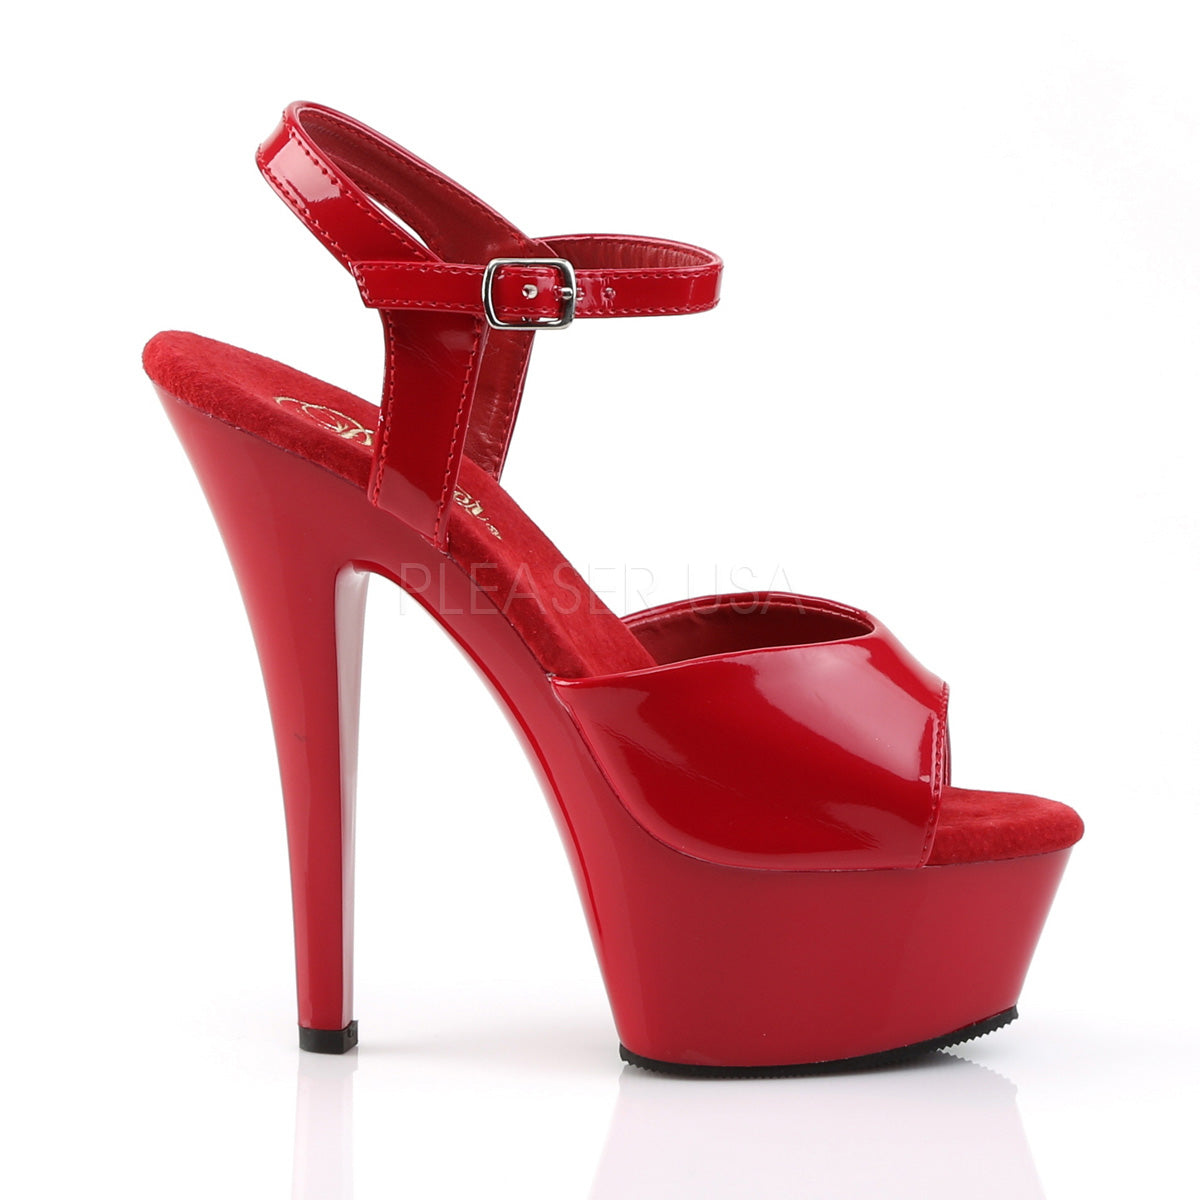 6 inches pleaser shoes